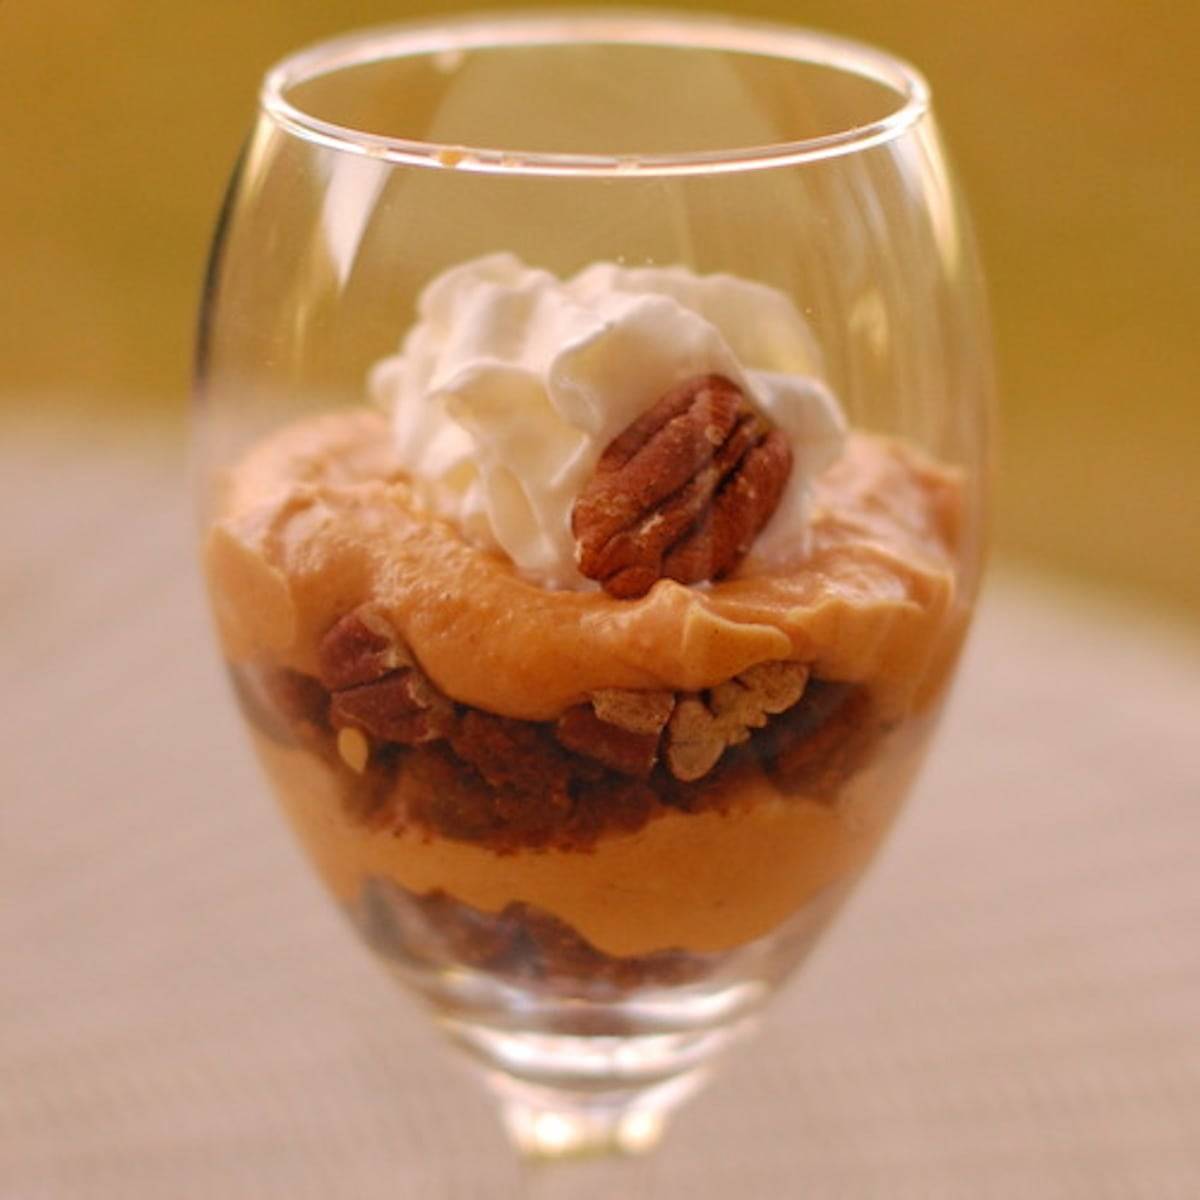 Pumpkin pecan cheesecake parfait in a glass with whipped cream and a pecan.